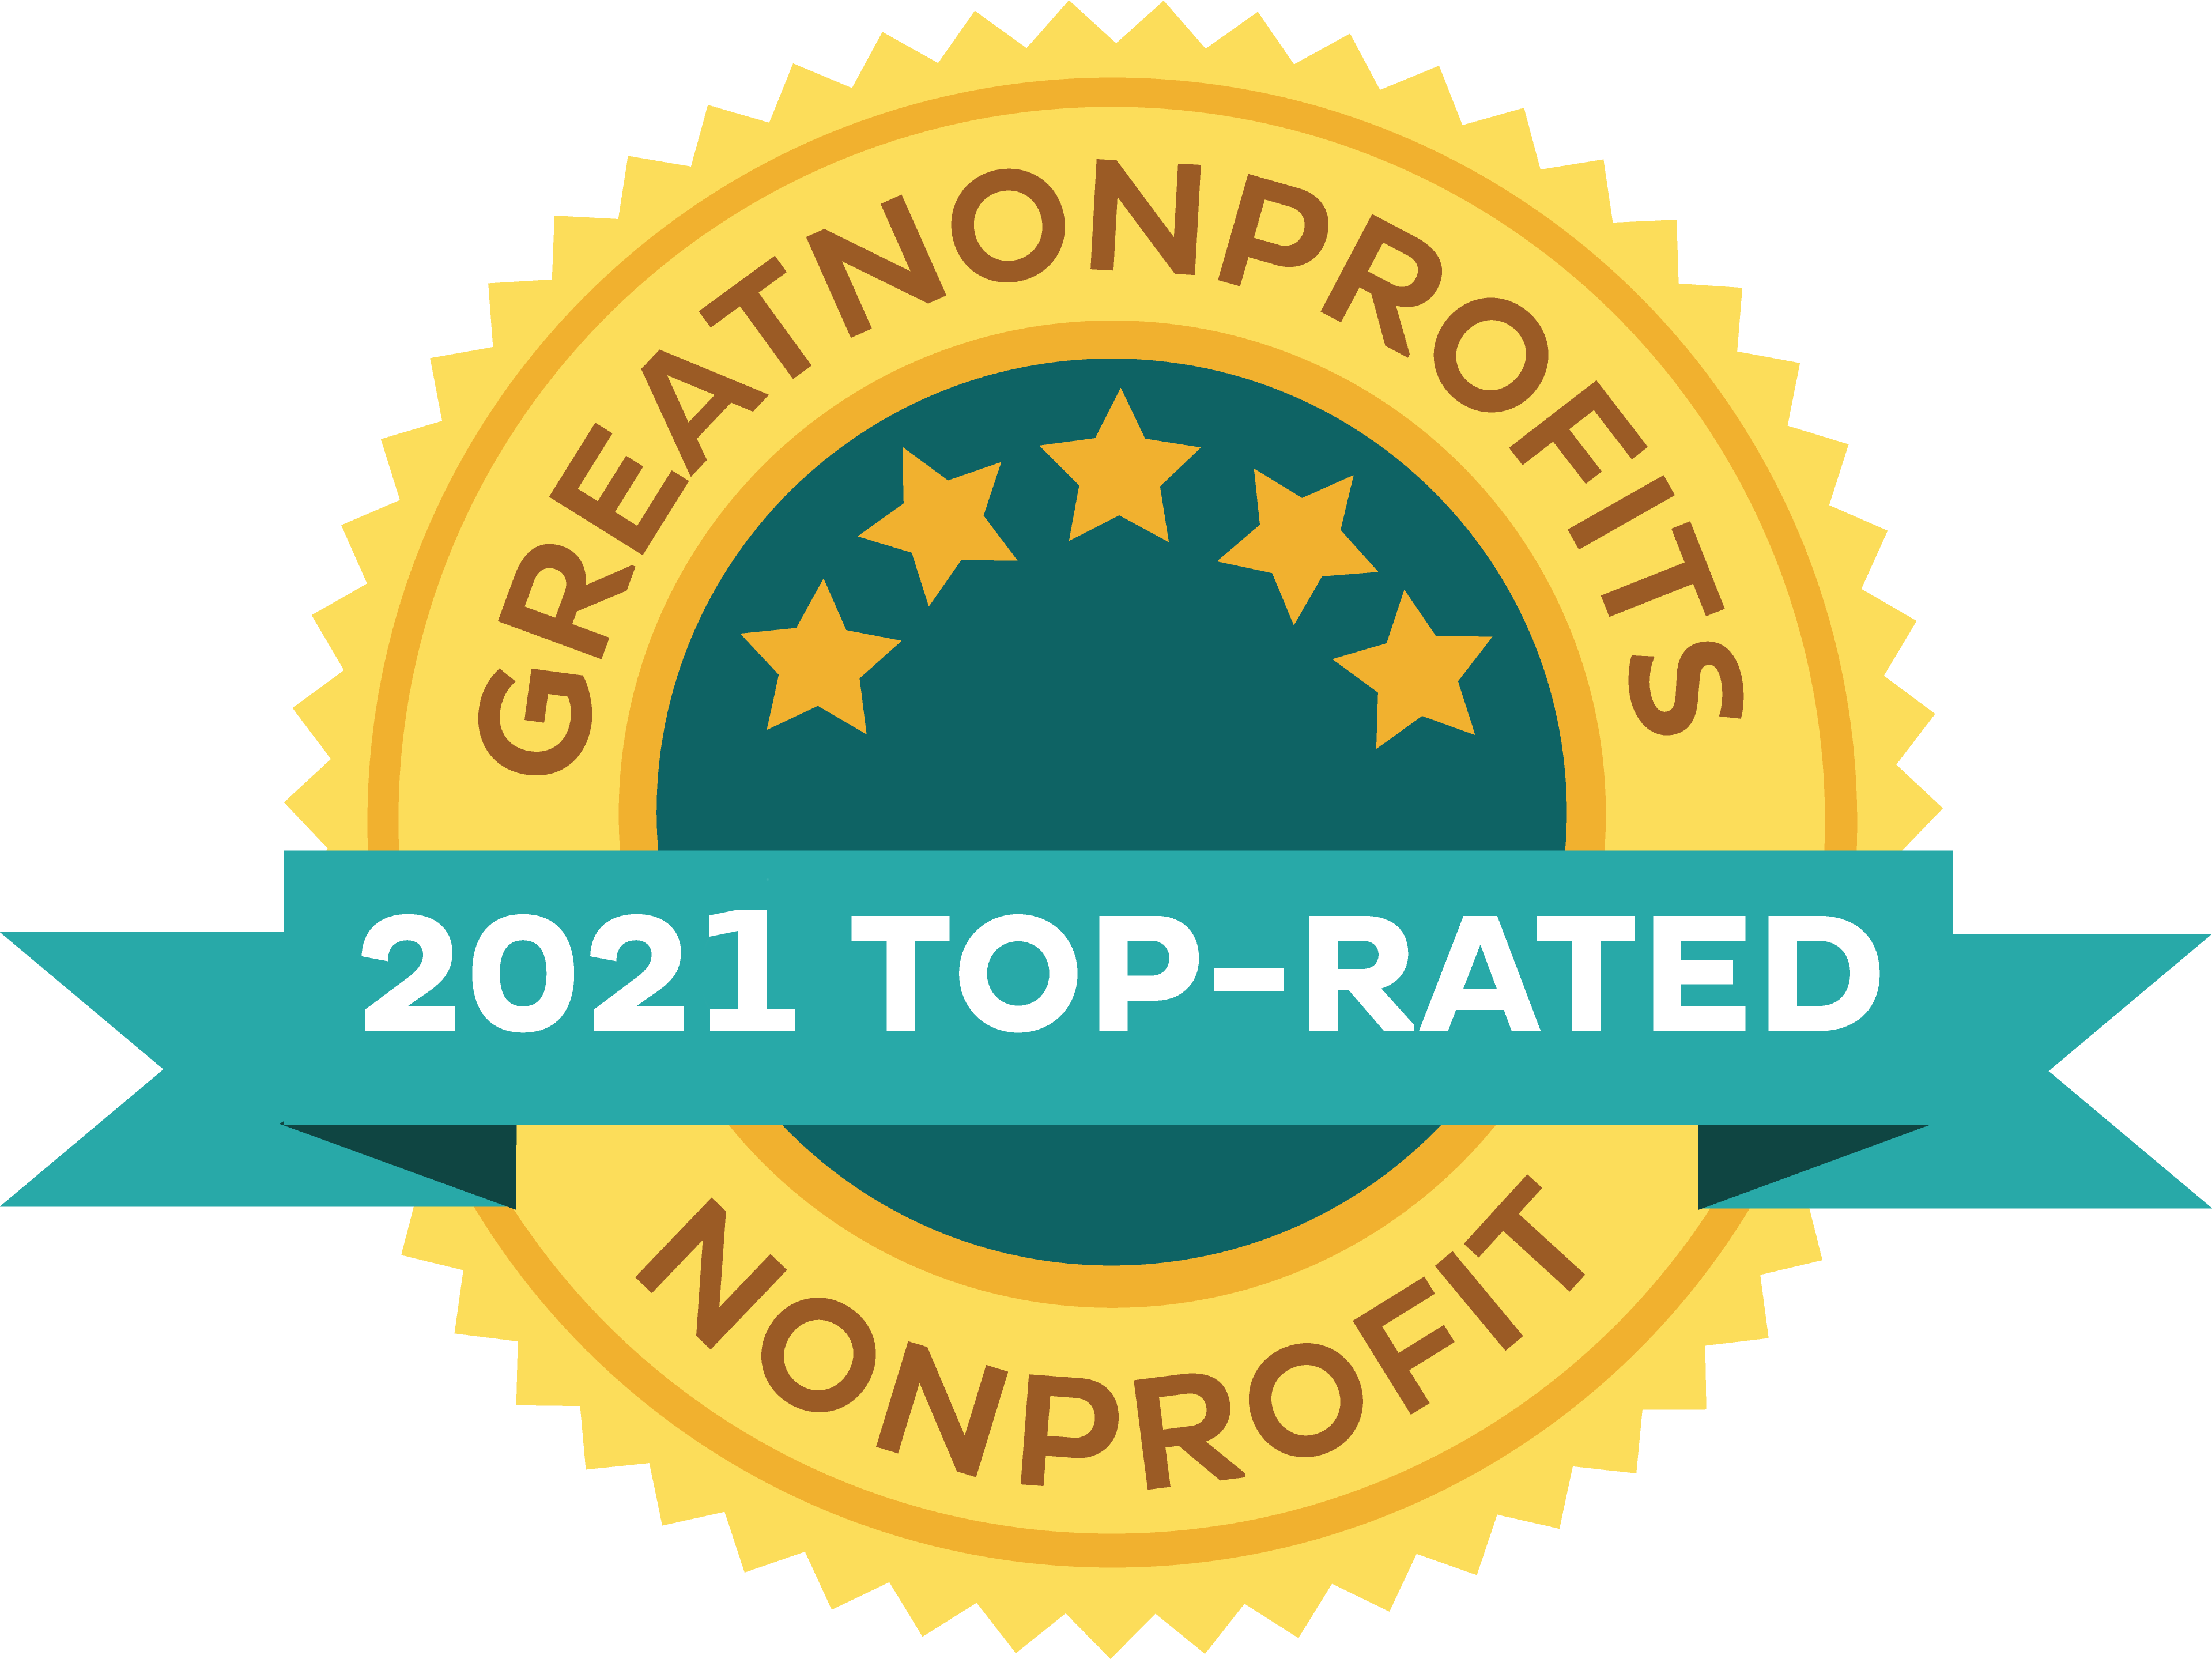 Top-Rated Nonprofit